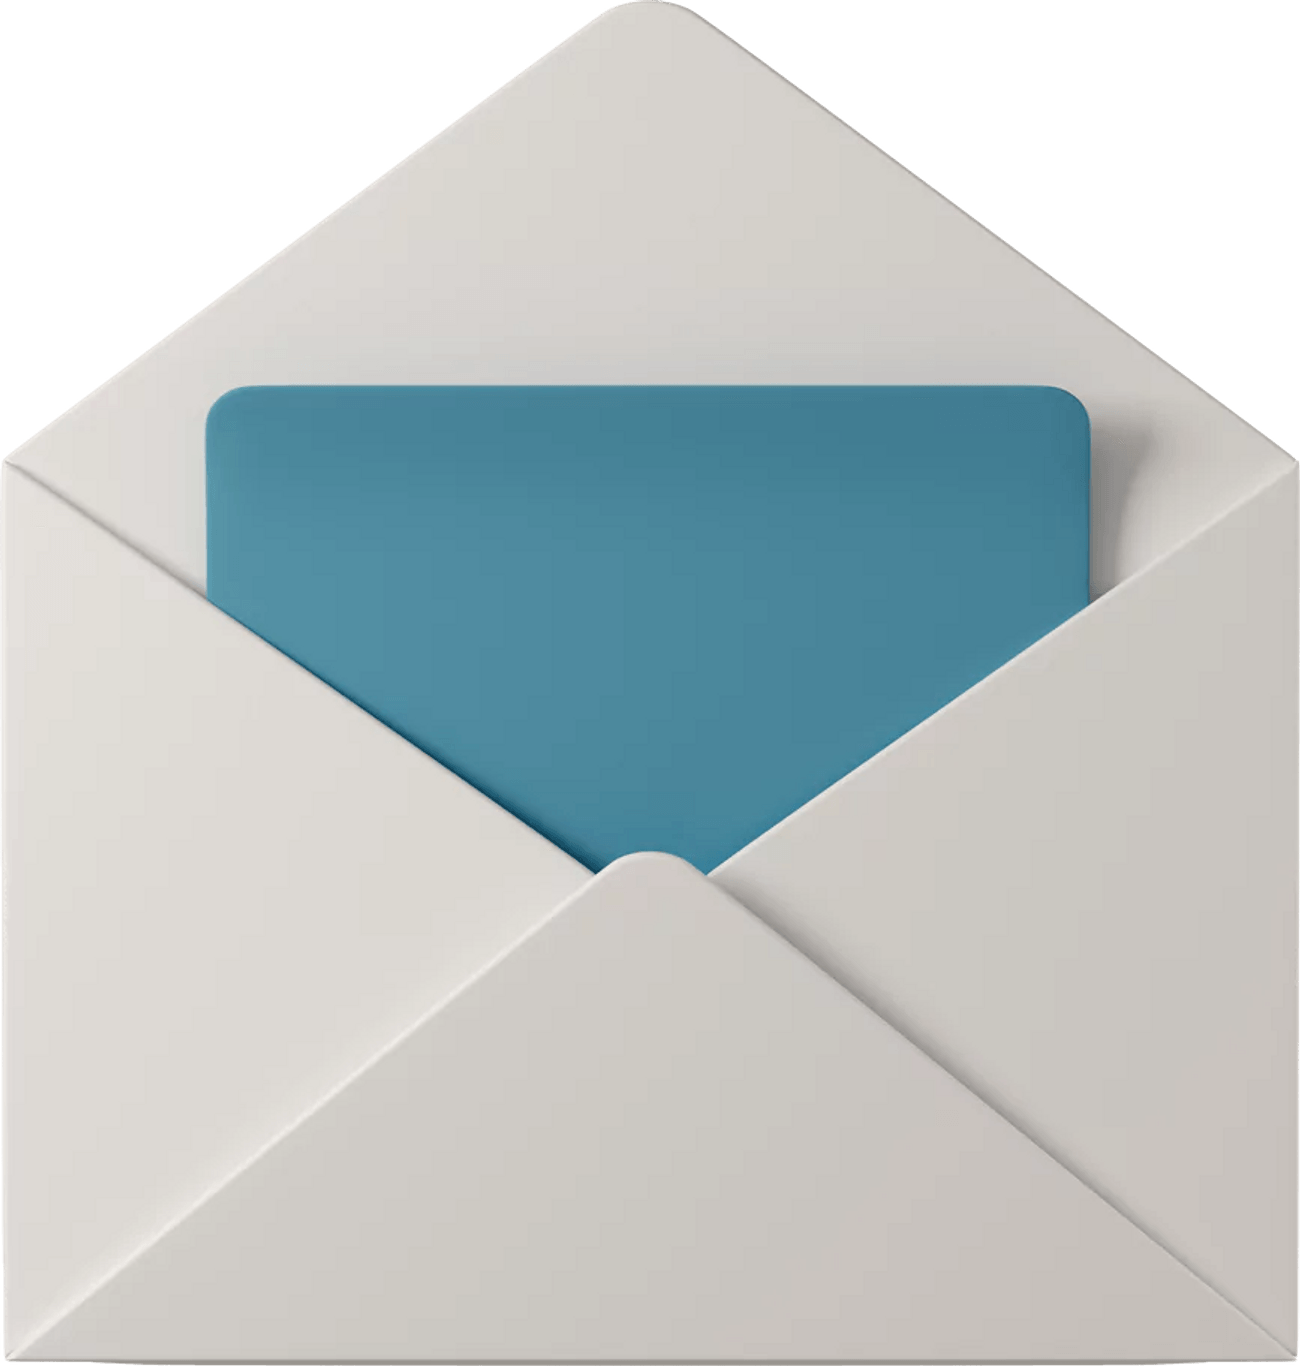 Decorative image of an envelope